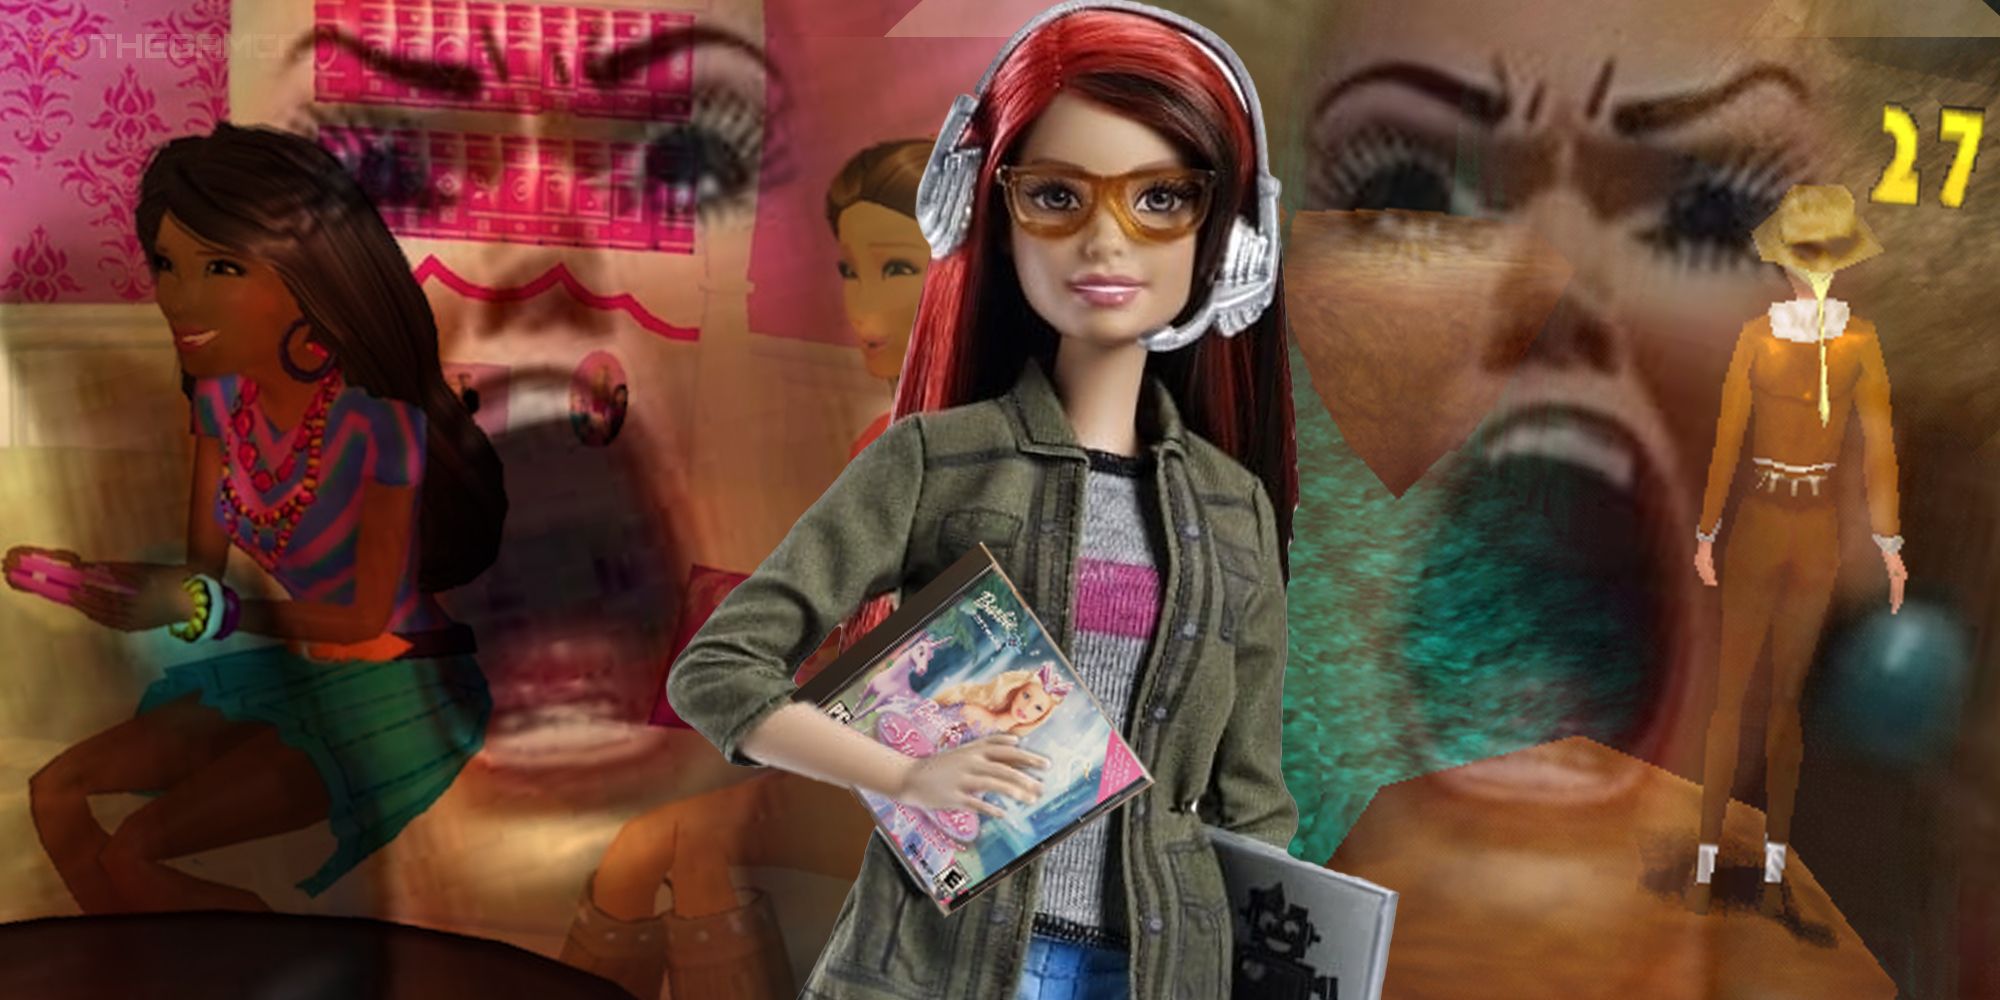 Game developer Barbie with footage from other barbie games